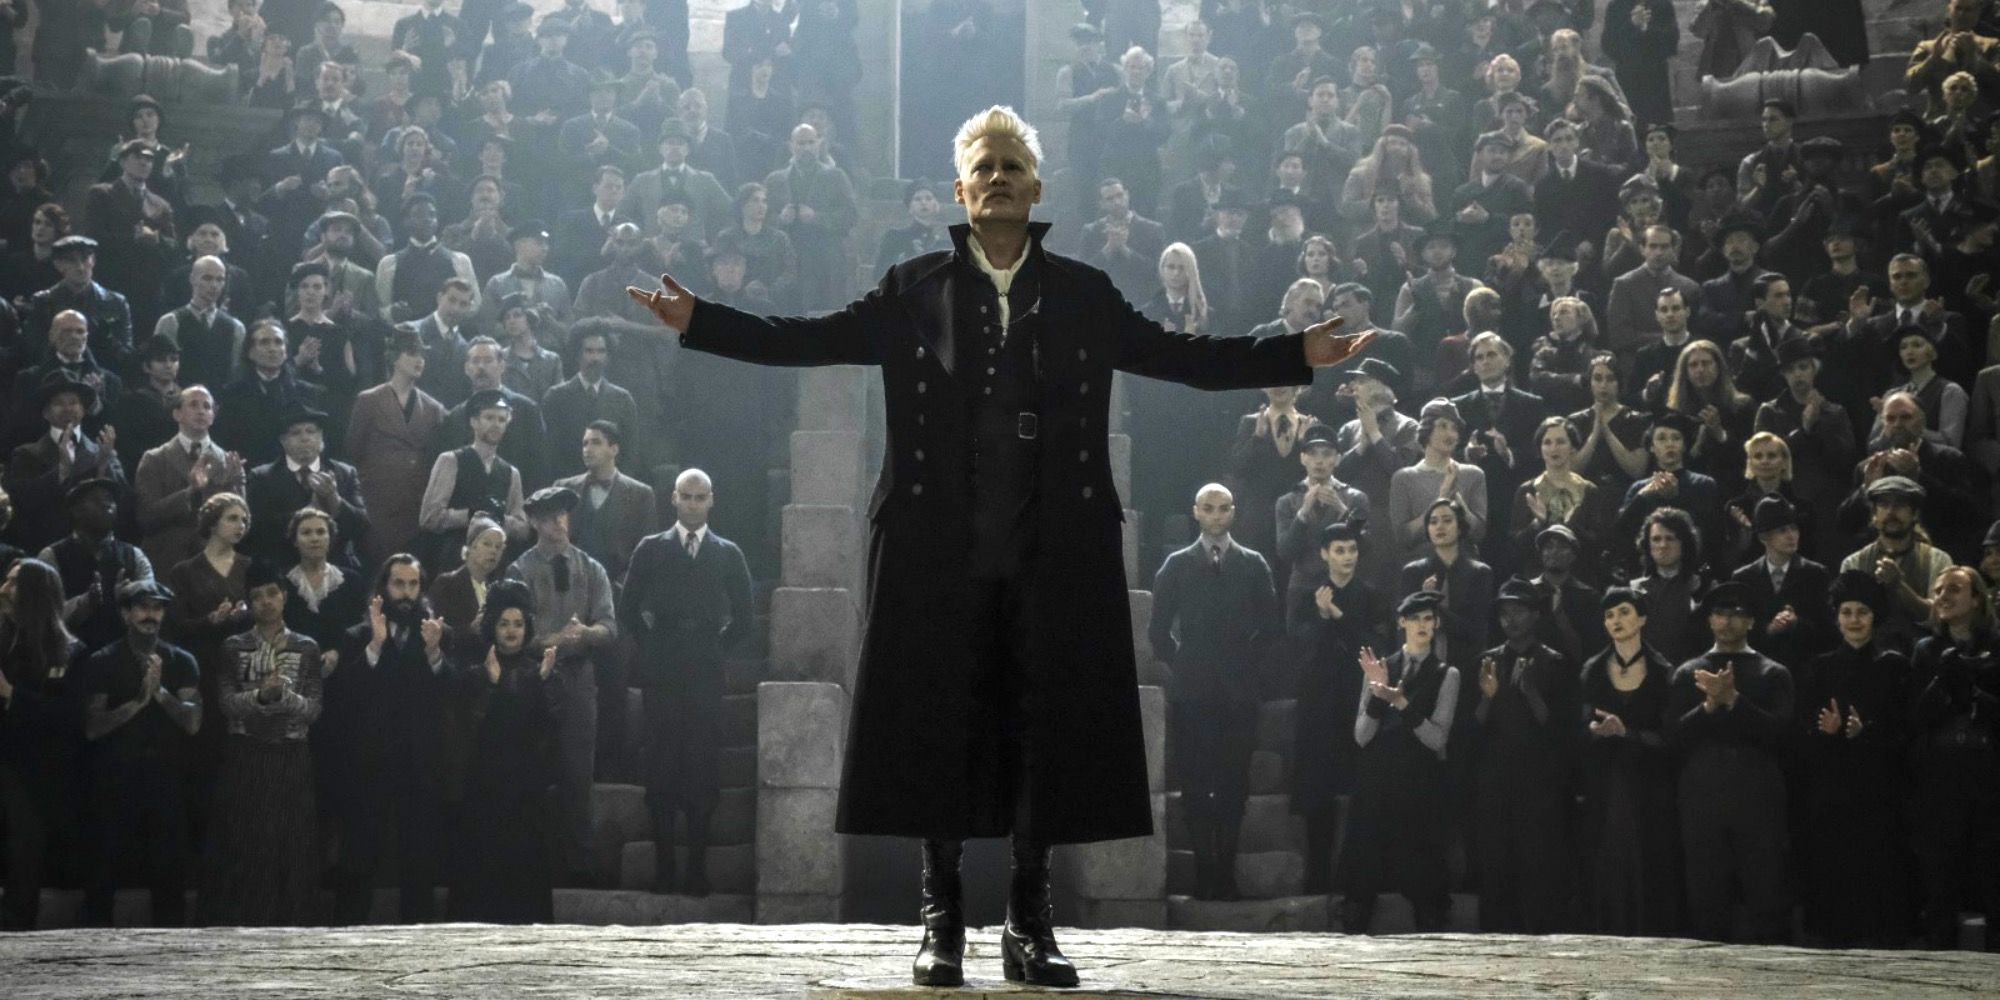 Johnny Depp as Grindelwald with his arms out in front of a crowd.